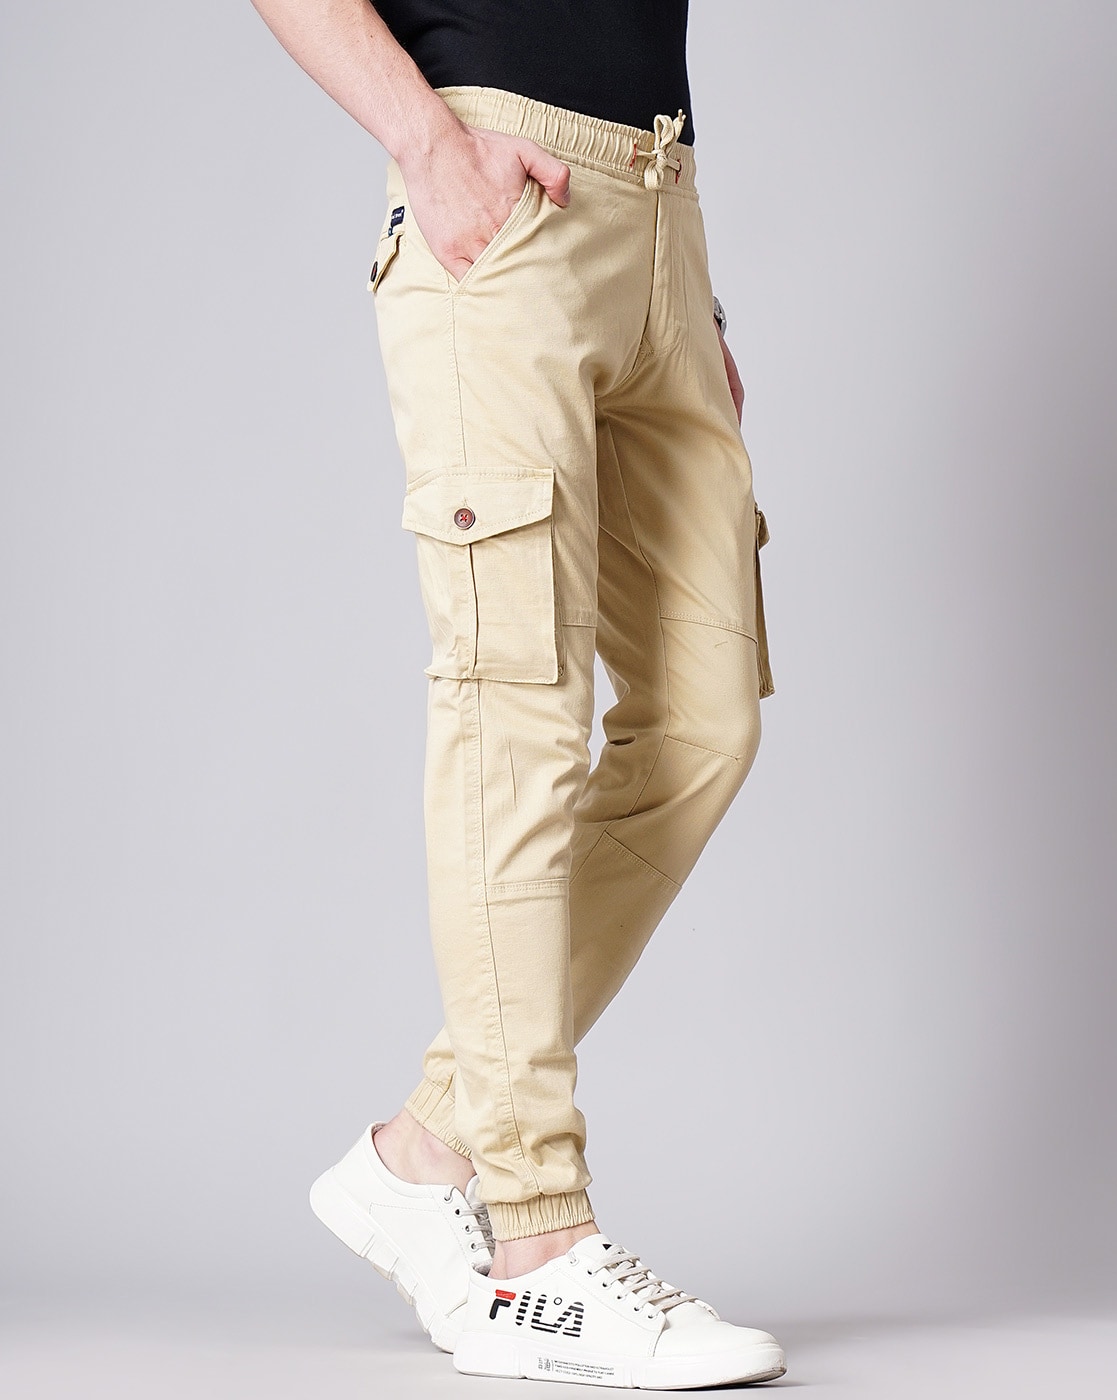 Mens Cargo Pants Outfit Inspiration 18 Stylish Looks For 2023